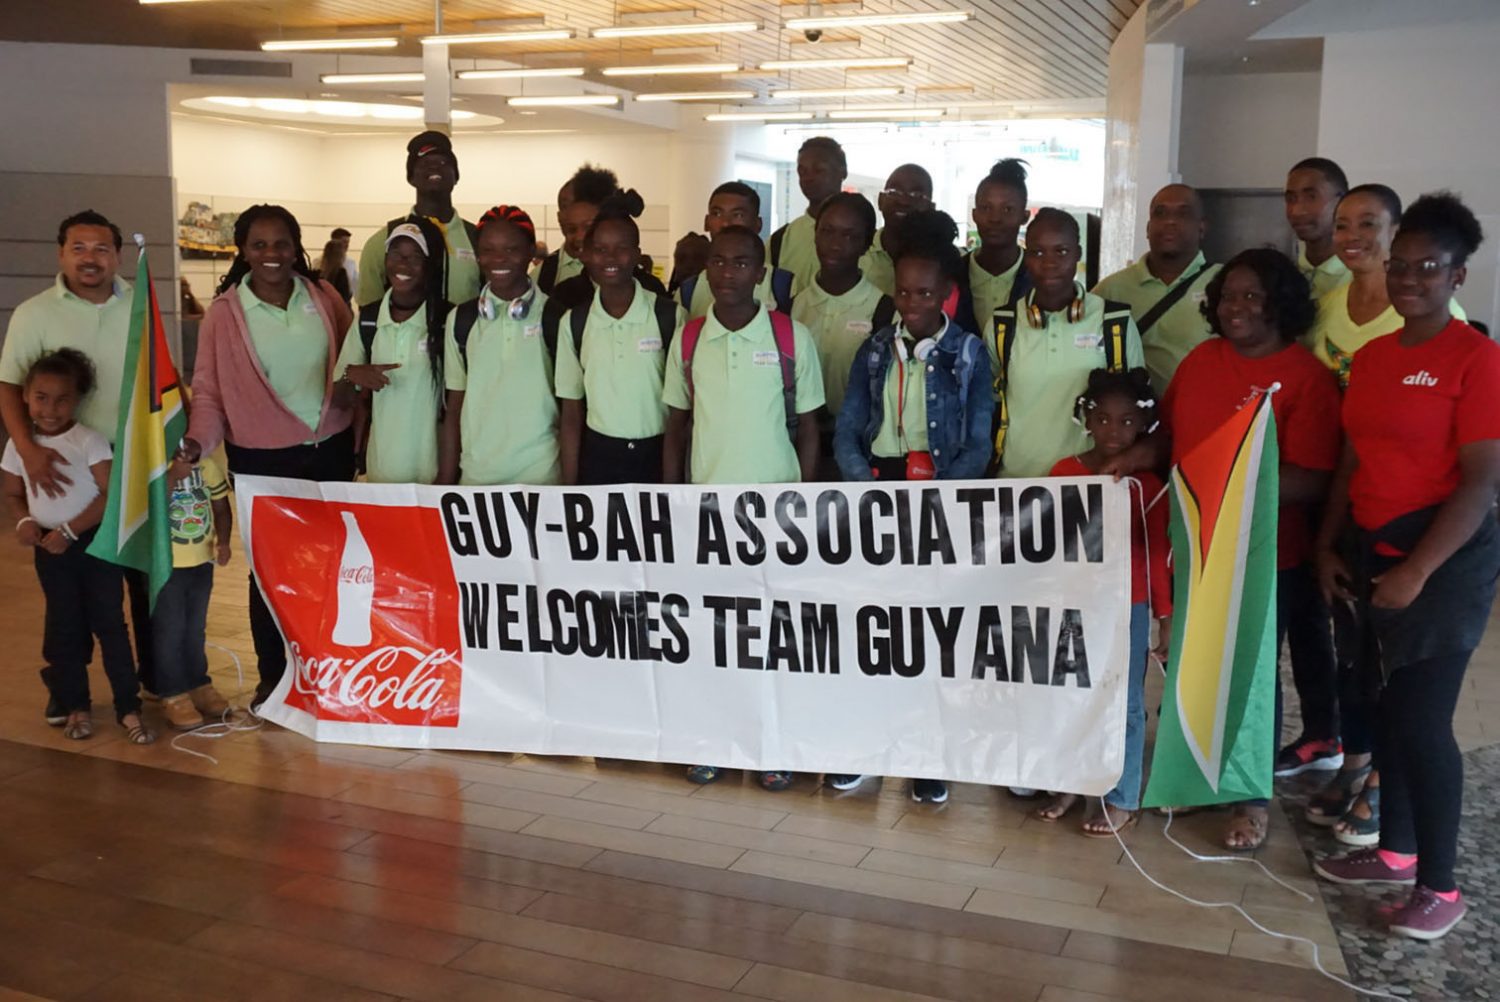 Guyana’s contingent received a warm welcome from the GUY-BAH Association upon its arrival yesterday at the Lynden Pindling International Airport in Nassau, Bahamas.